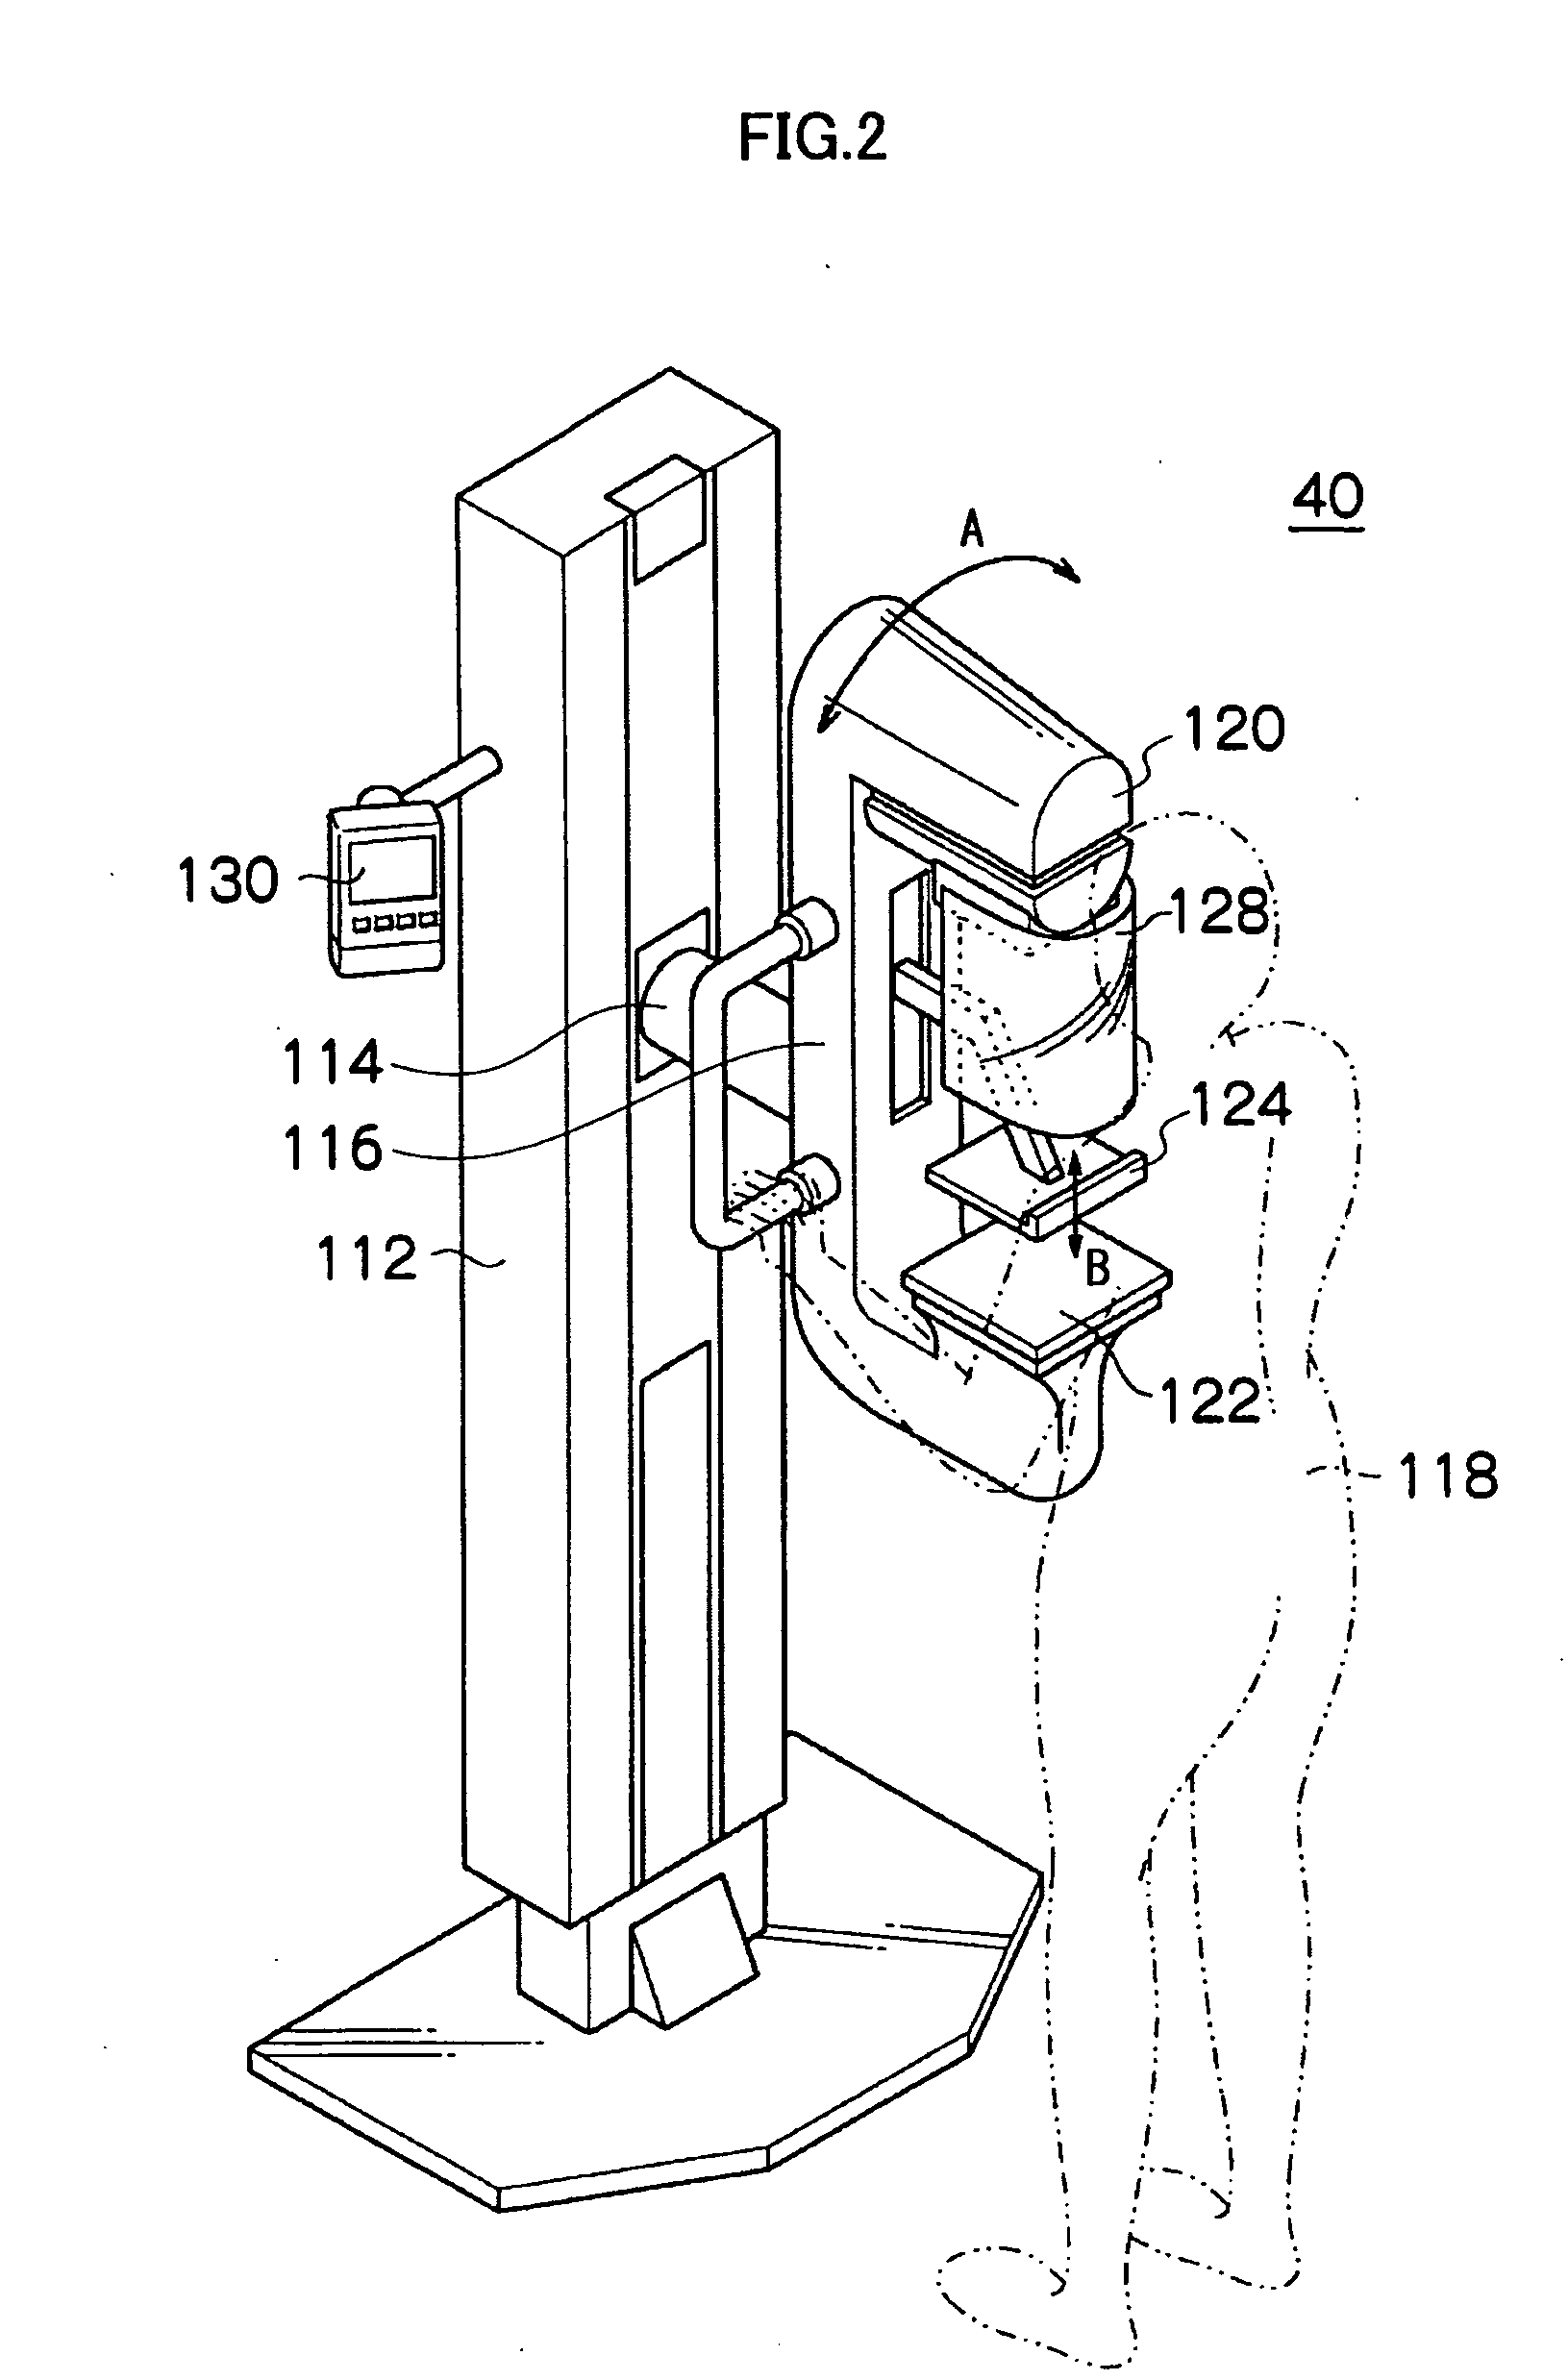 Apparatus for aiding photographing of medical image and computer program product for the same